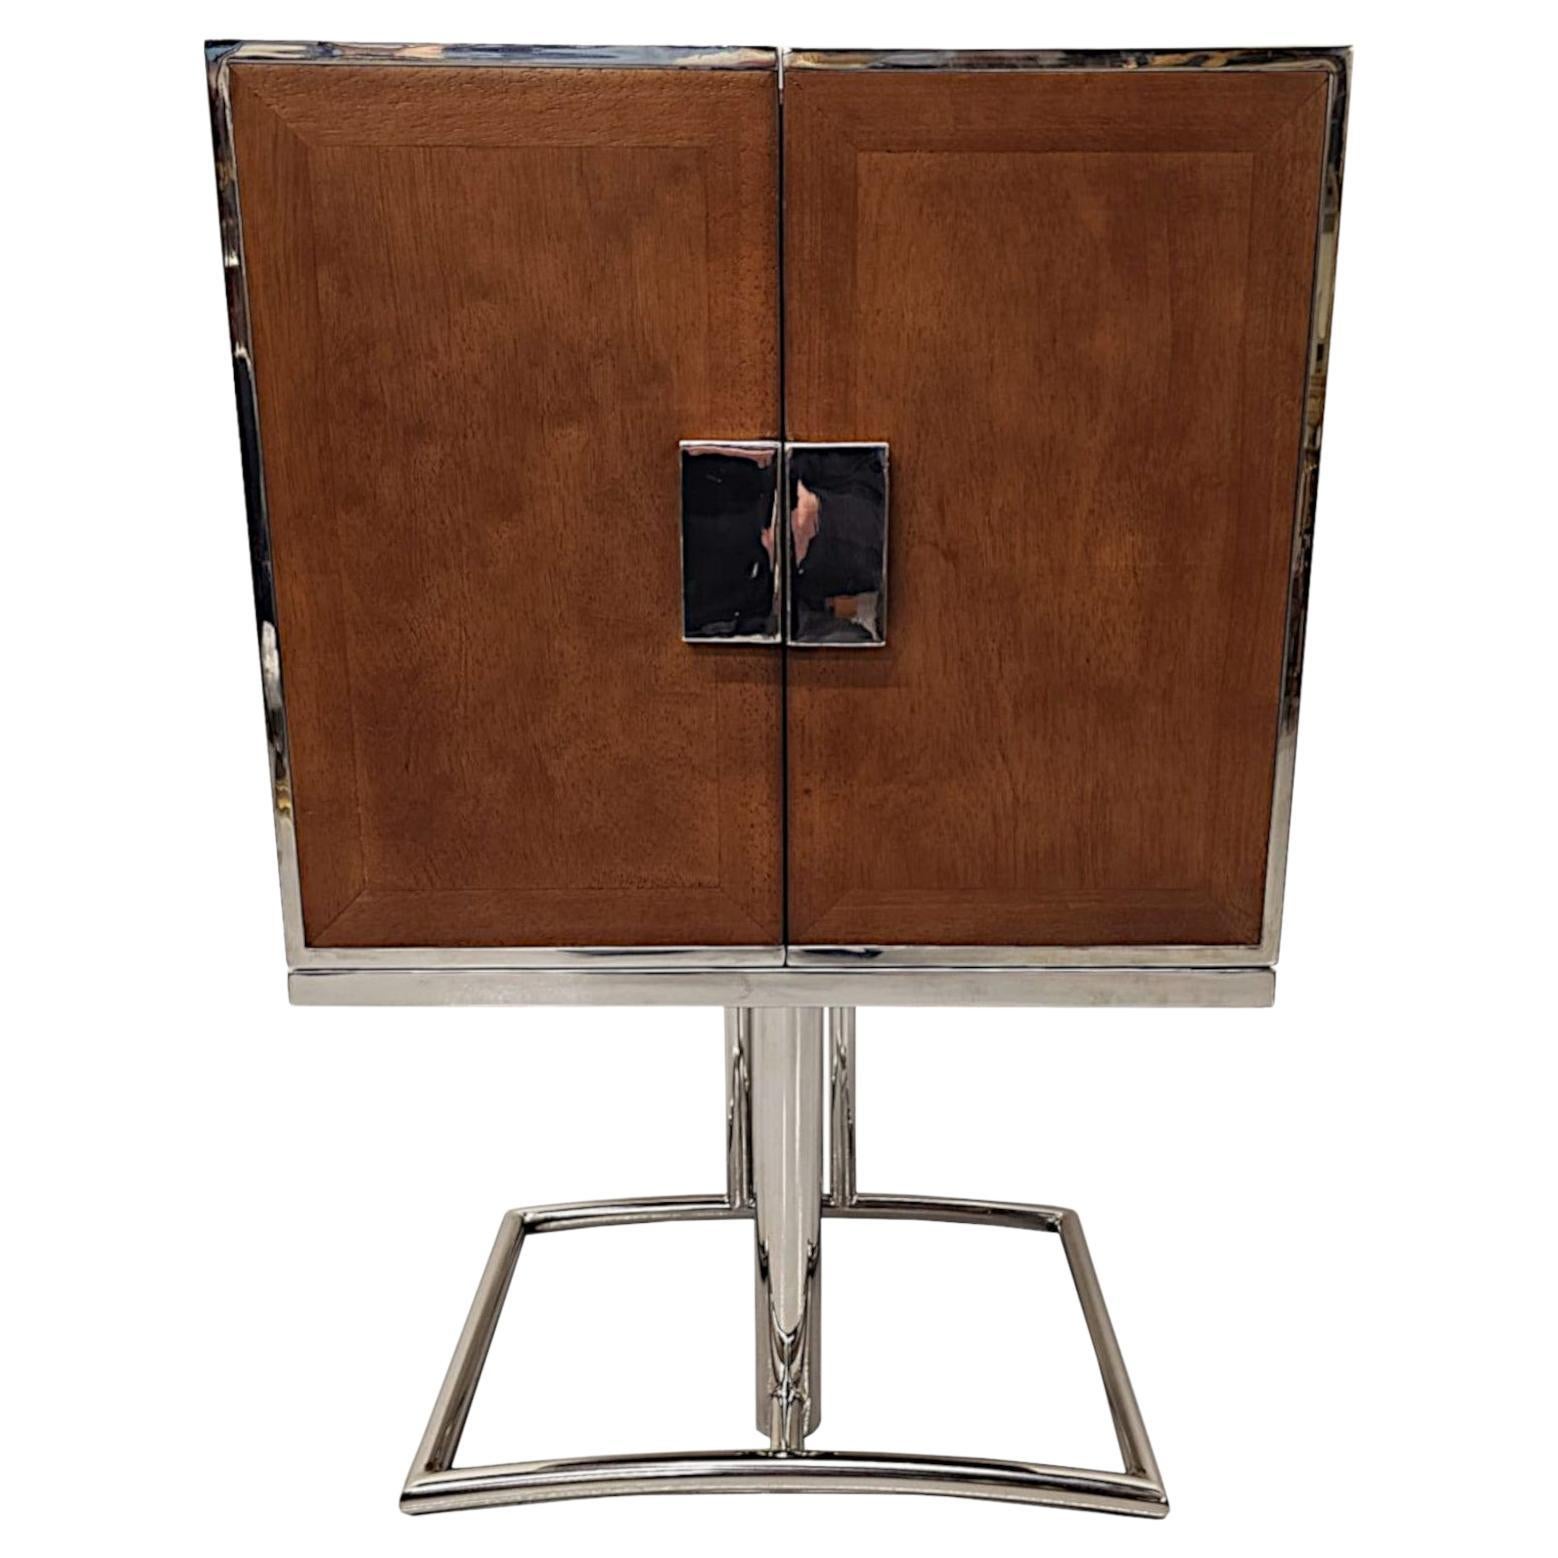 A Stunning Art Deco Design Cherrywood and Chrome Drinks Cabinet or Bar For Sale